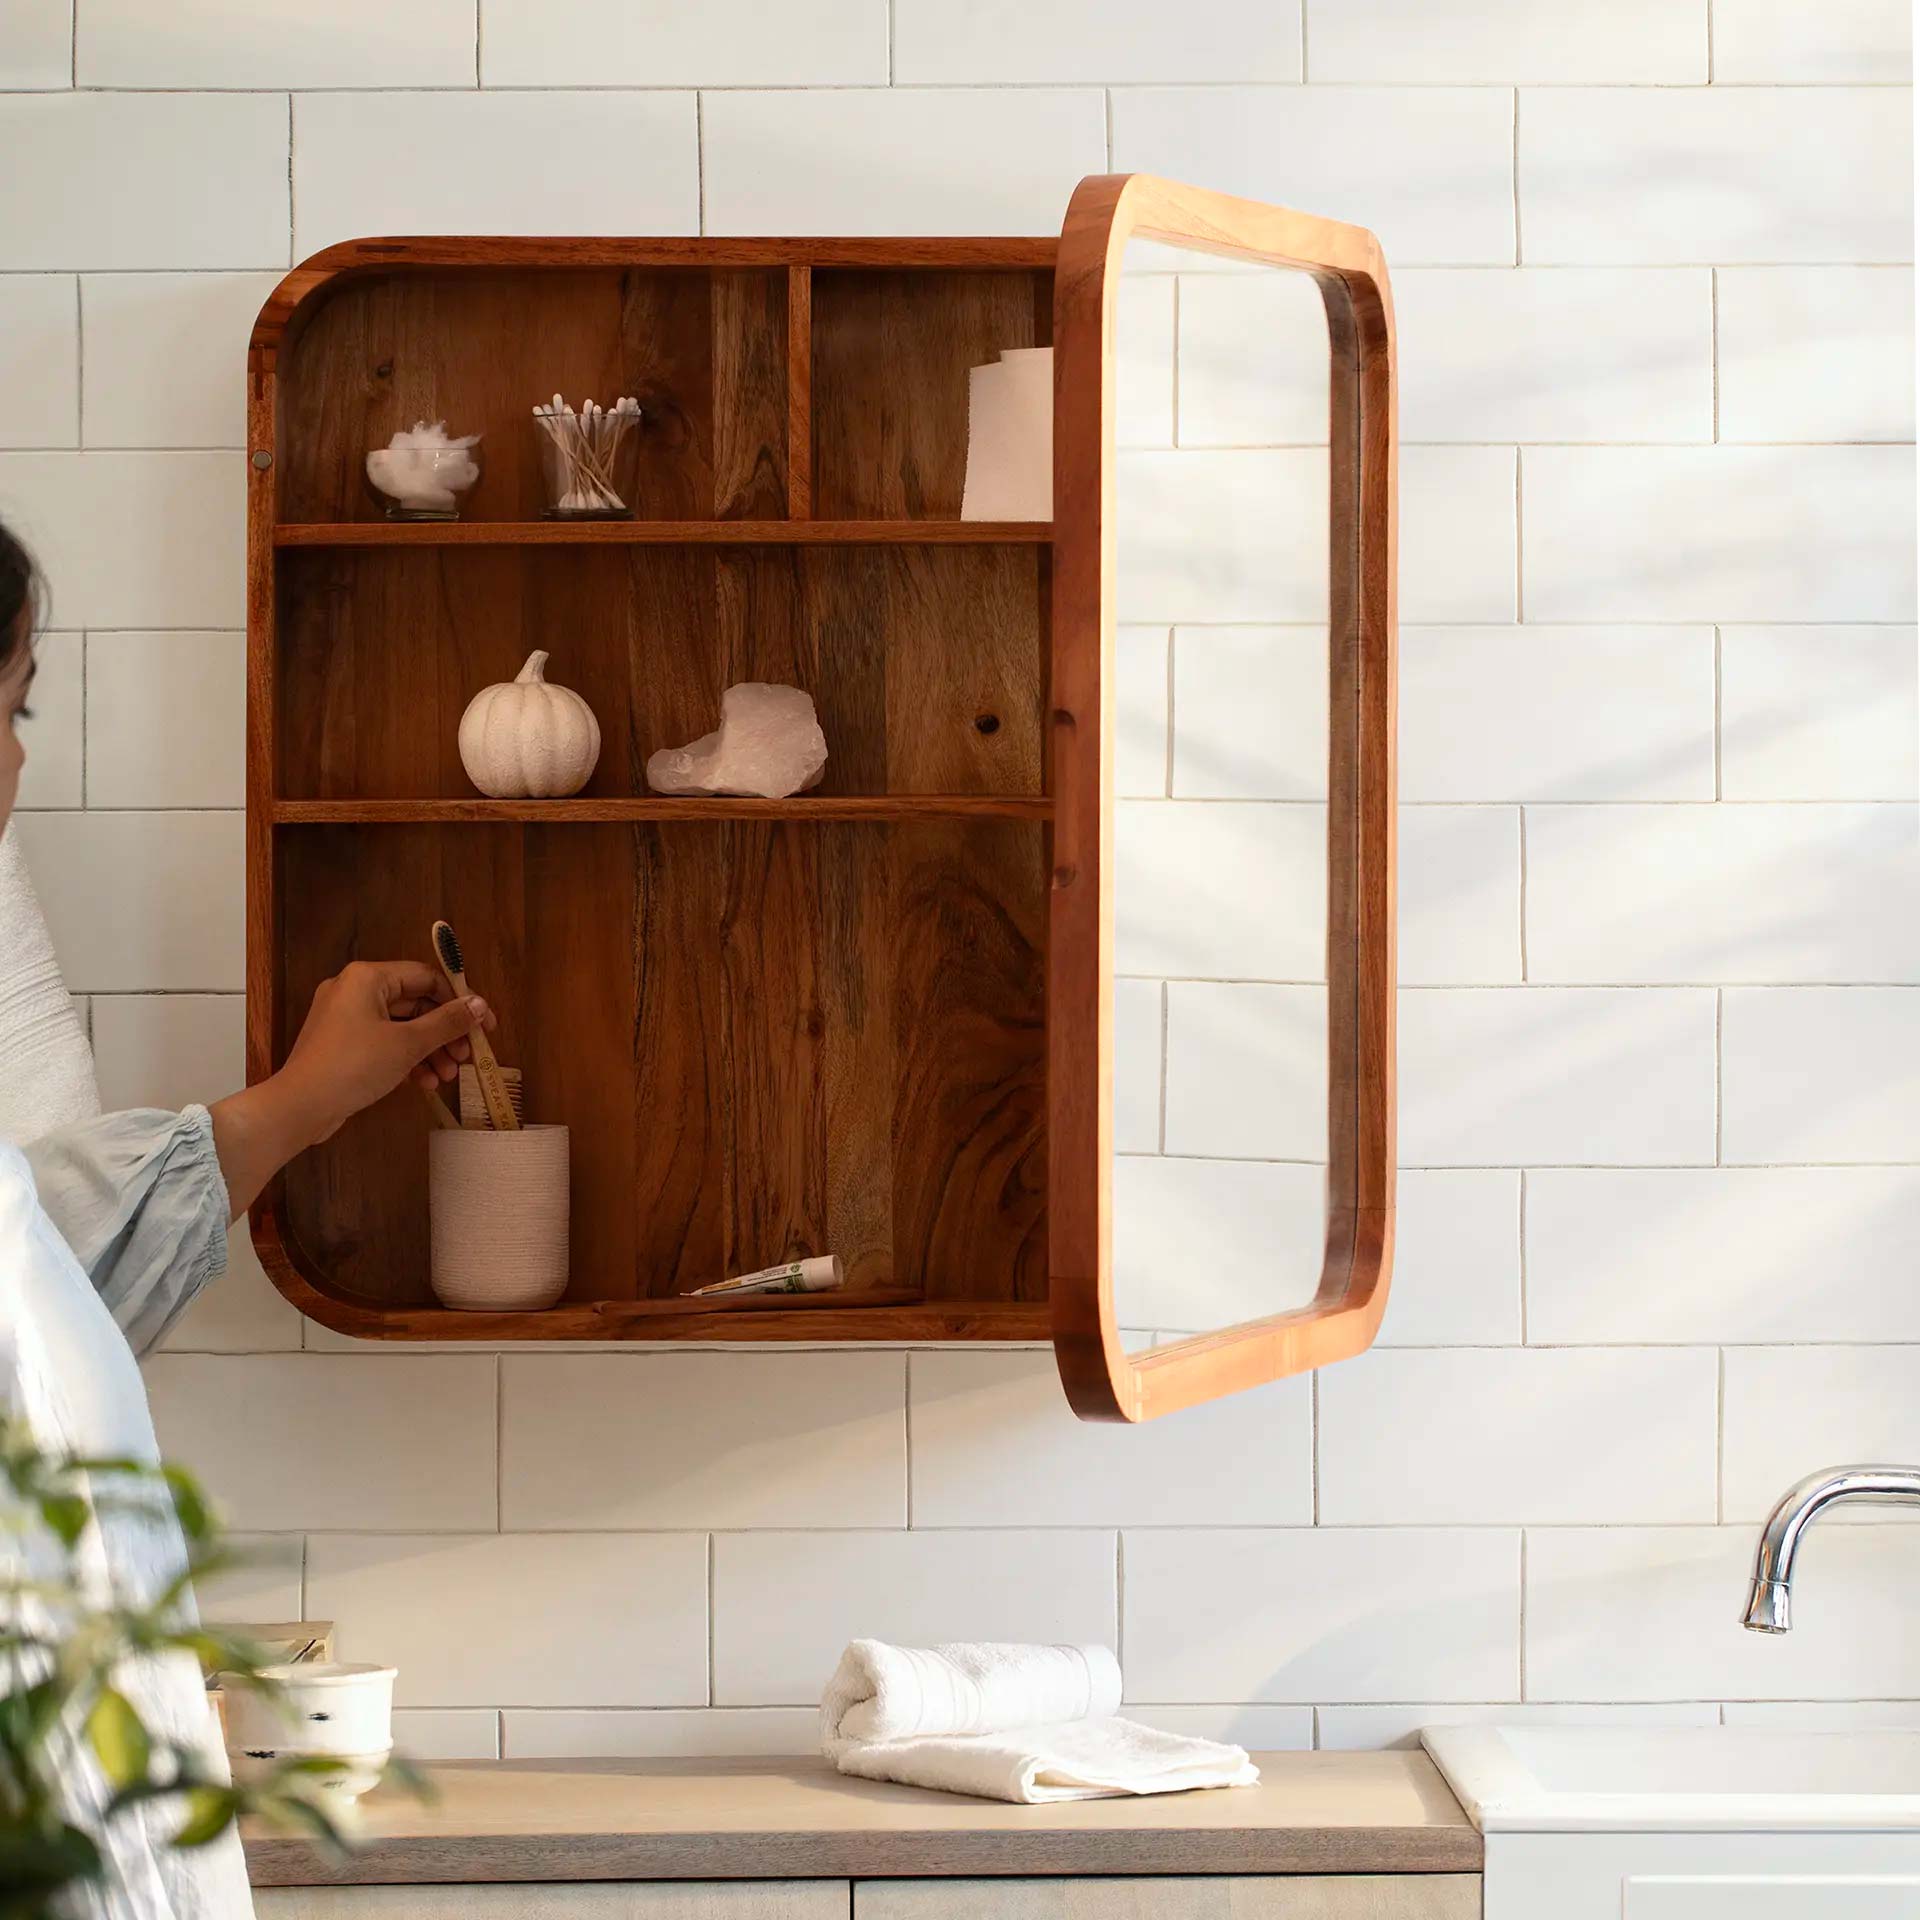 Wall Cabinet with Mirror - Square